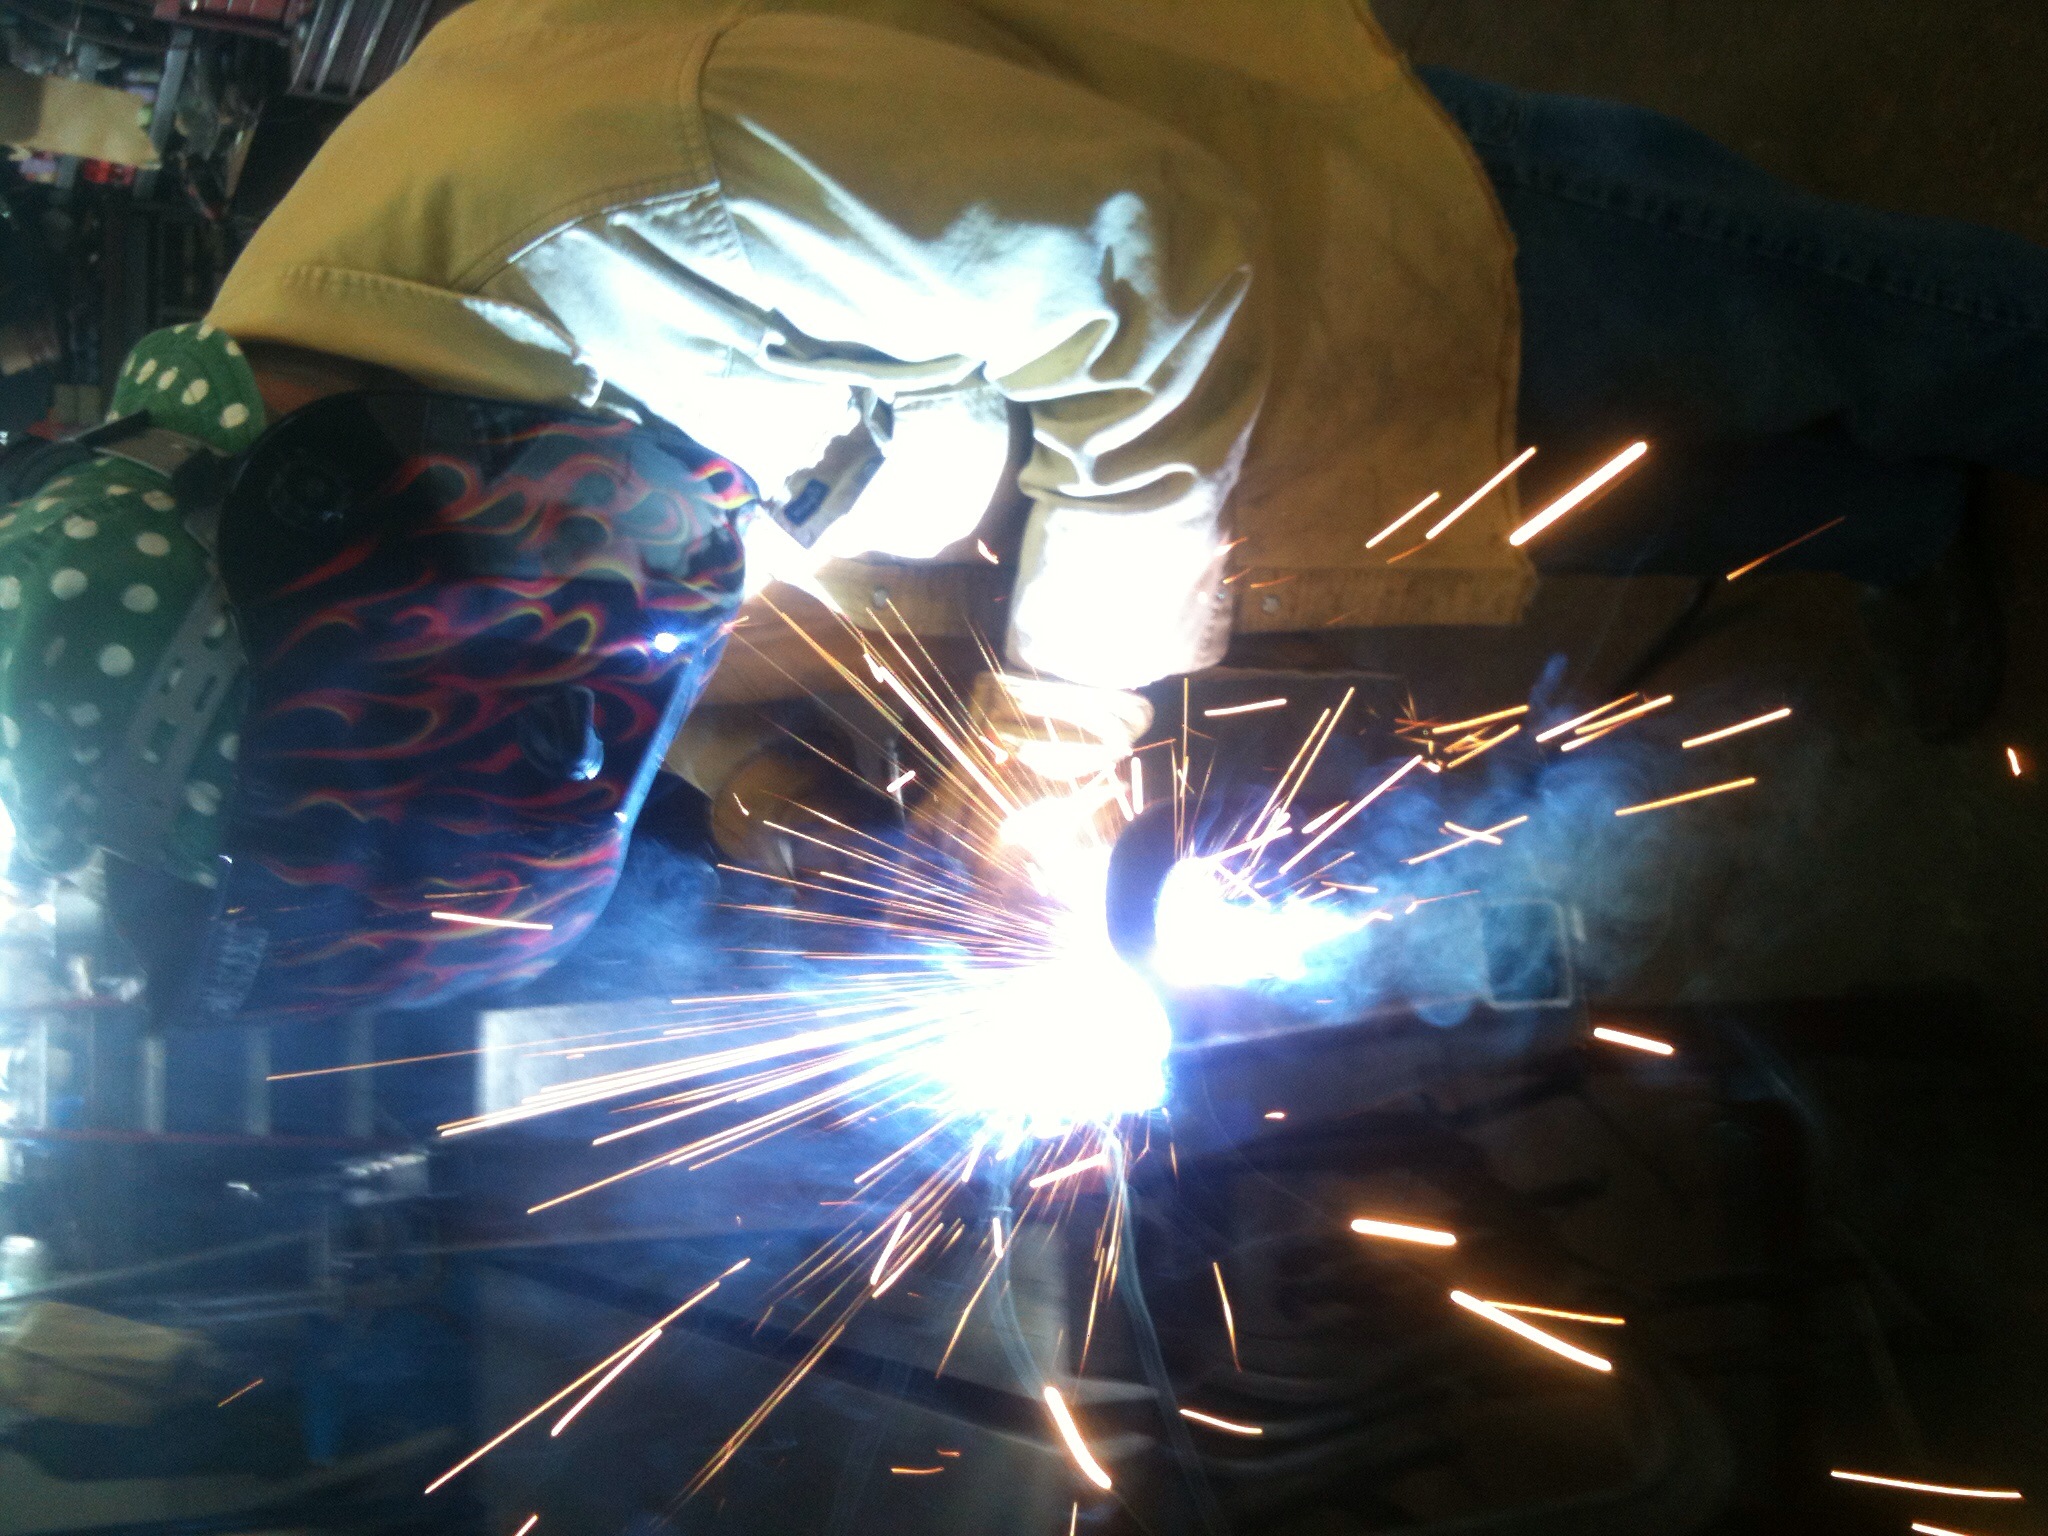 a woman wearing safety glasses holds a tool that's been welding into steel